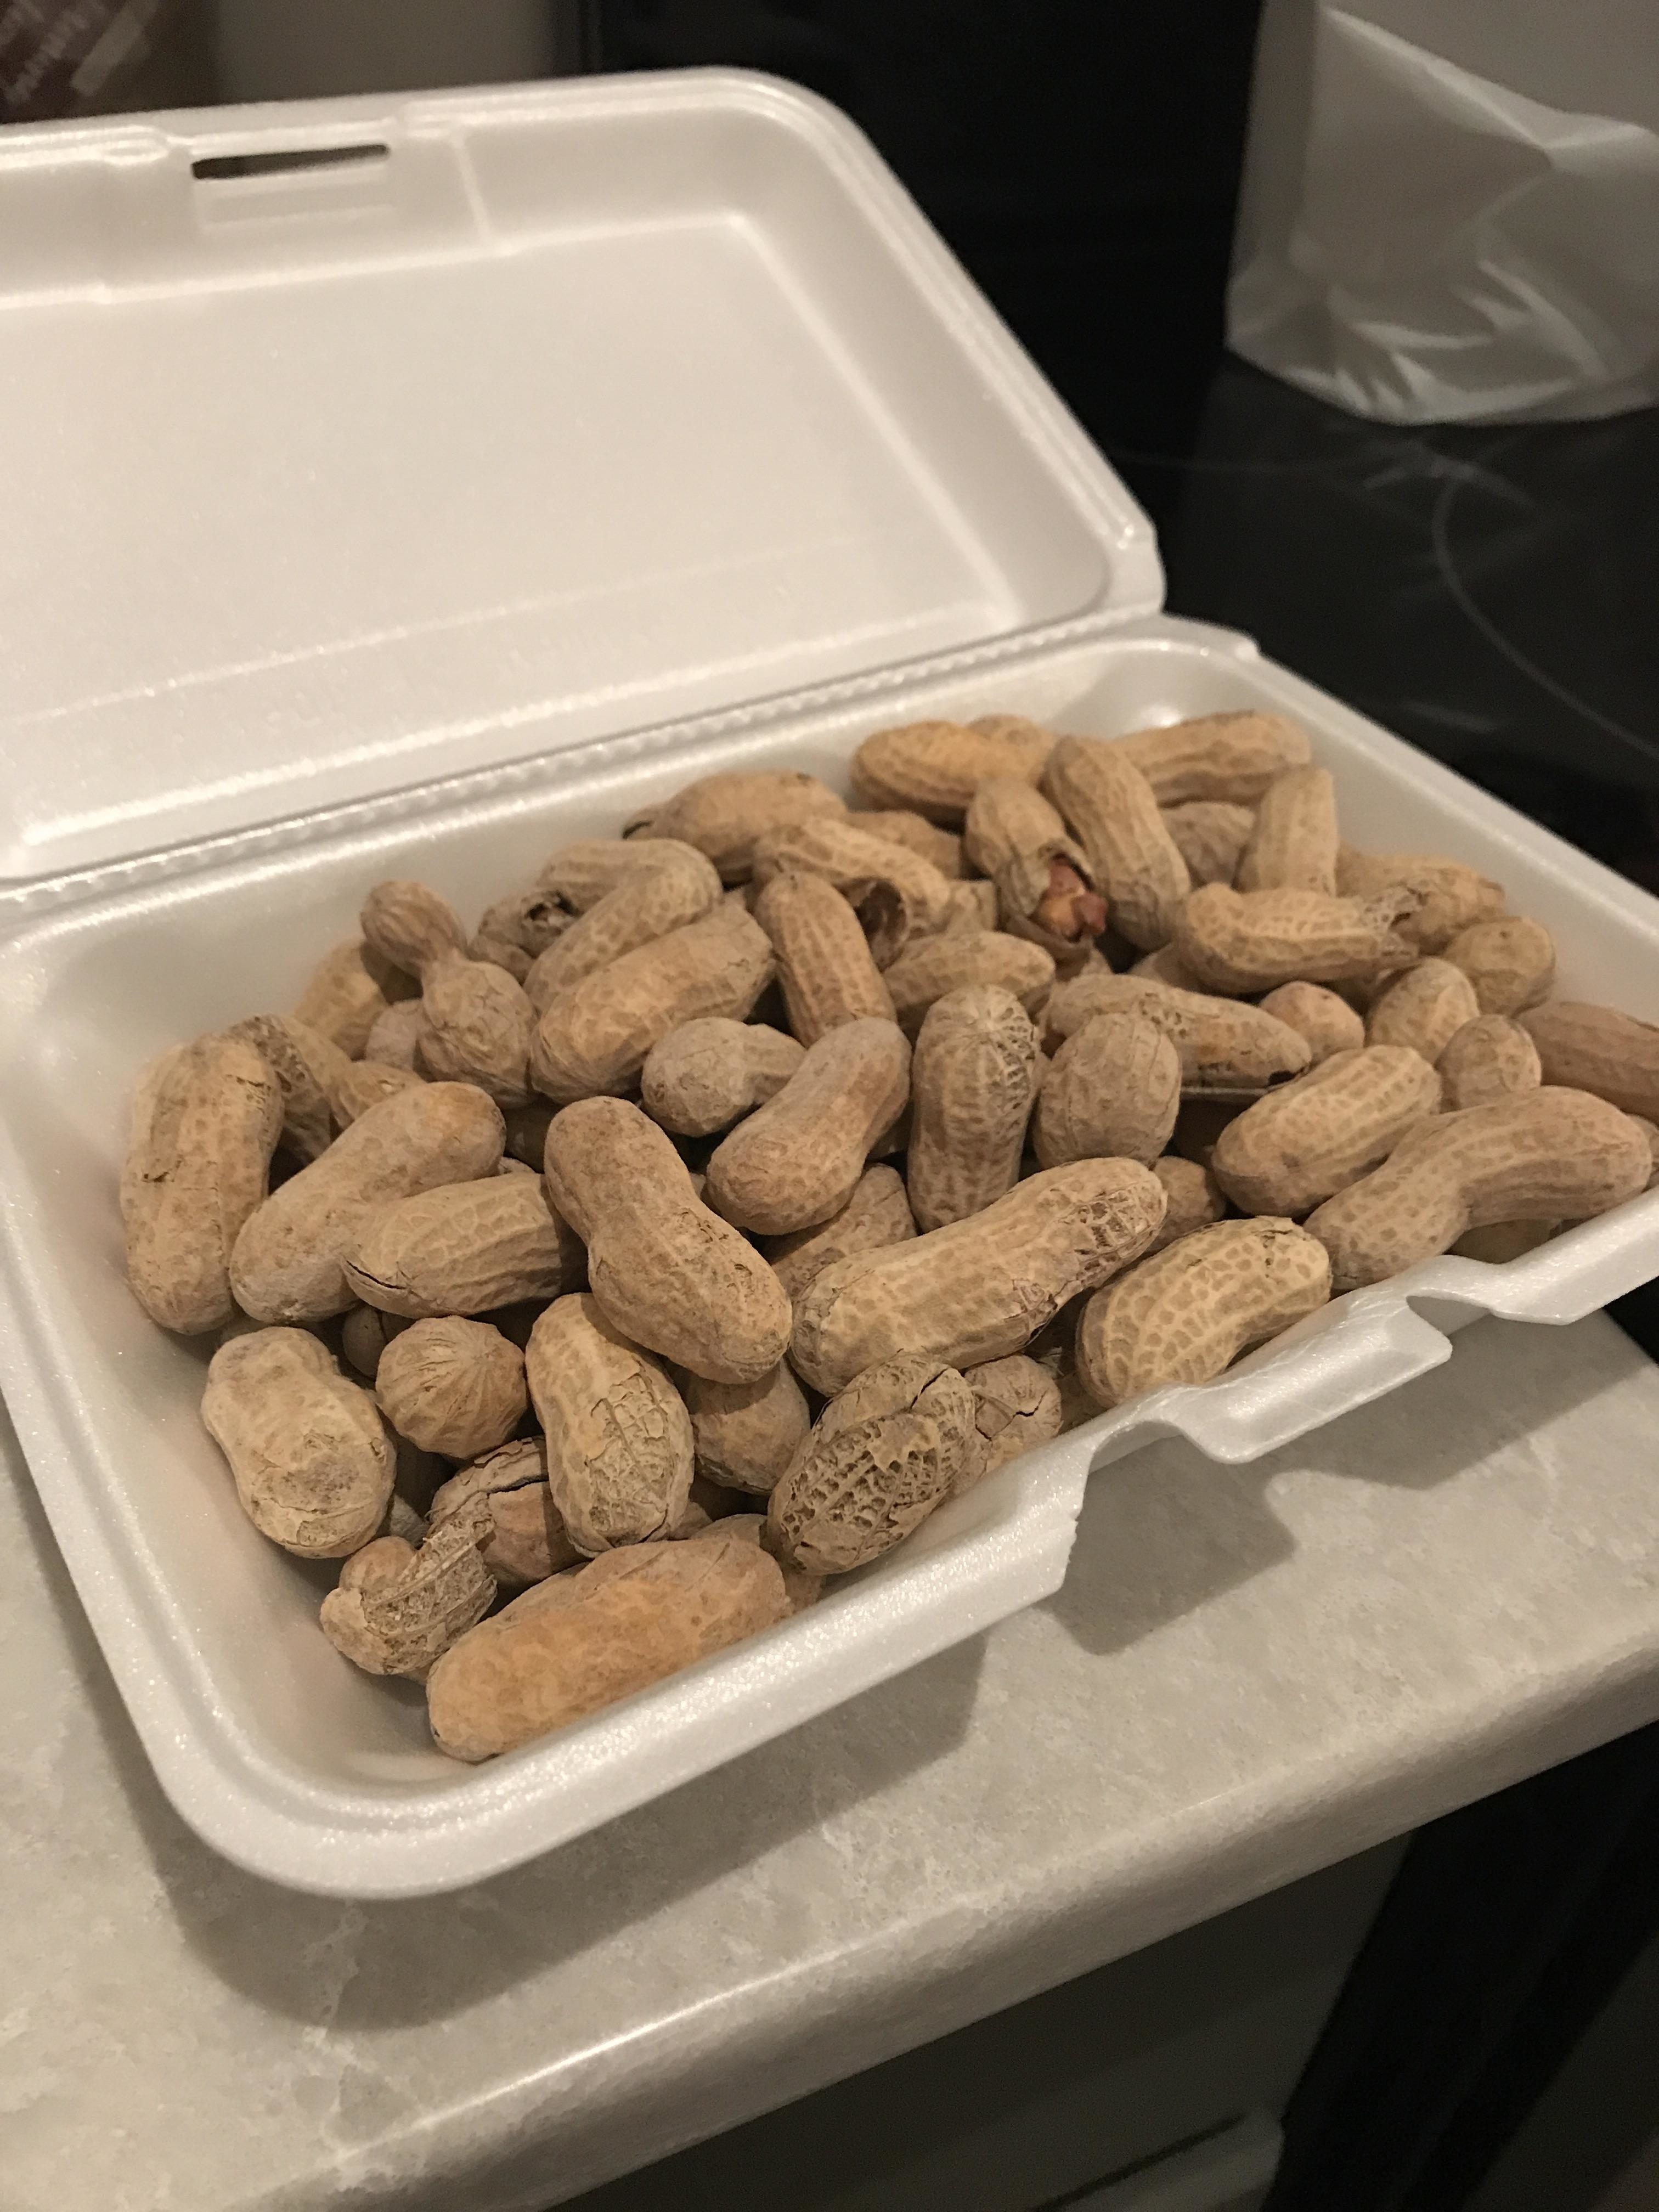 literally a styrofoam container with unshelled peanuts inside